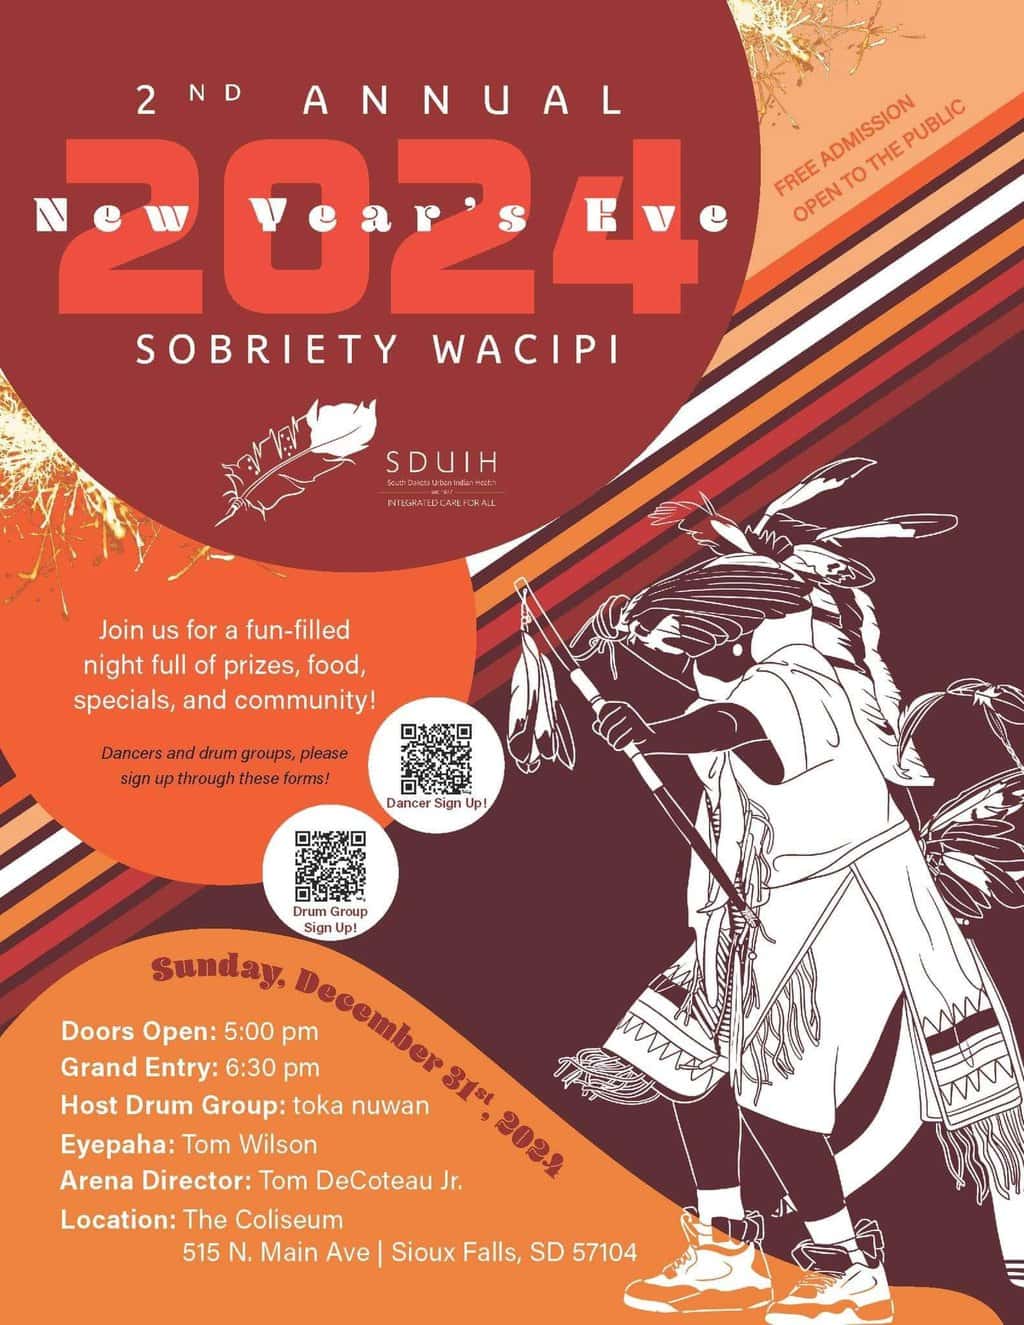 2nd Annual New Year's Eve Sobriety Wacipi